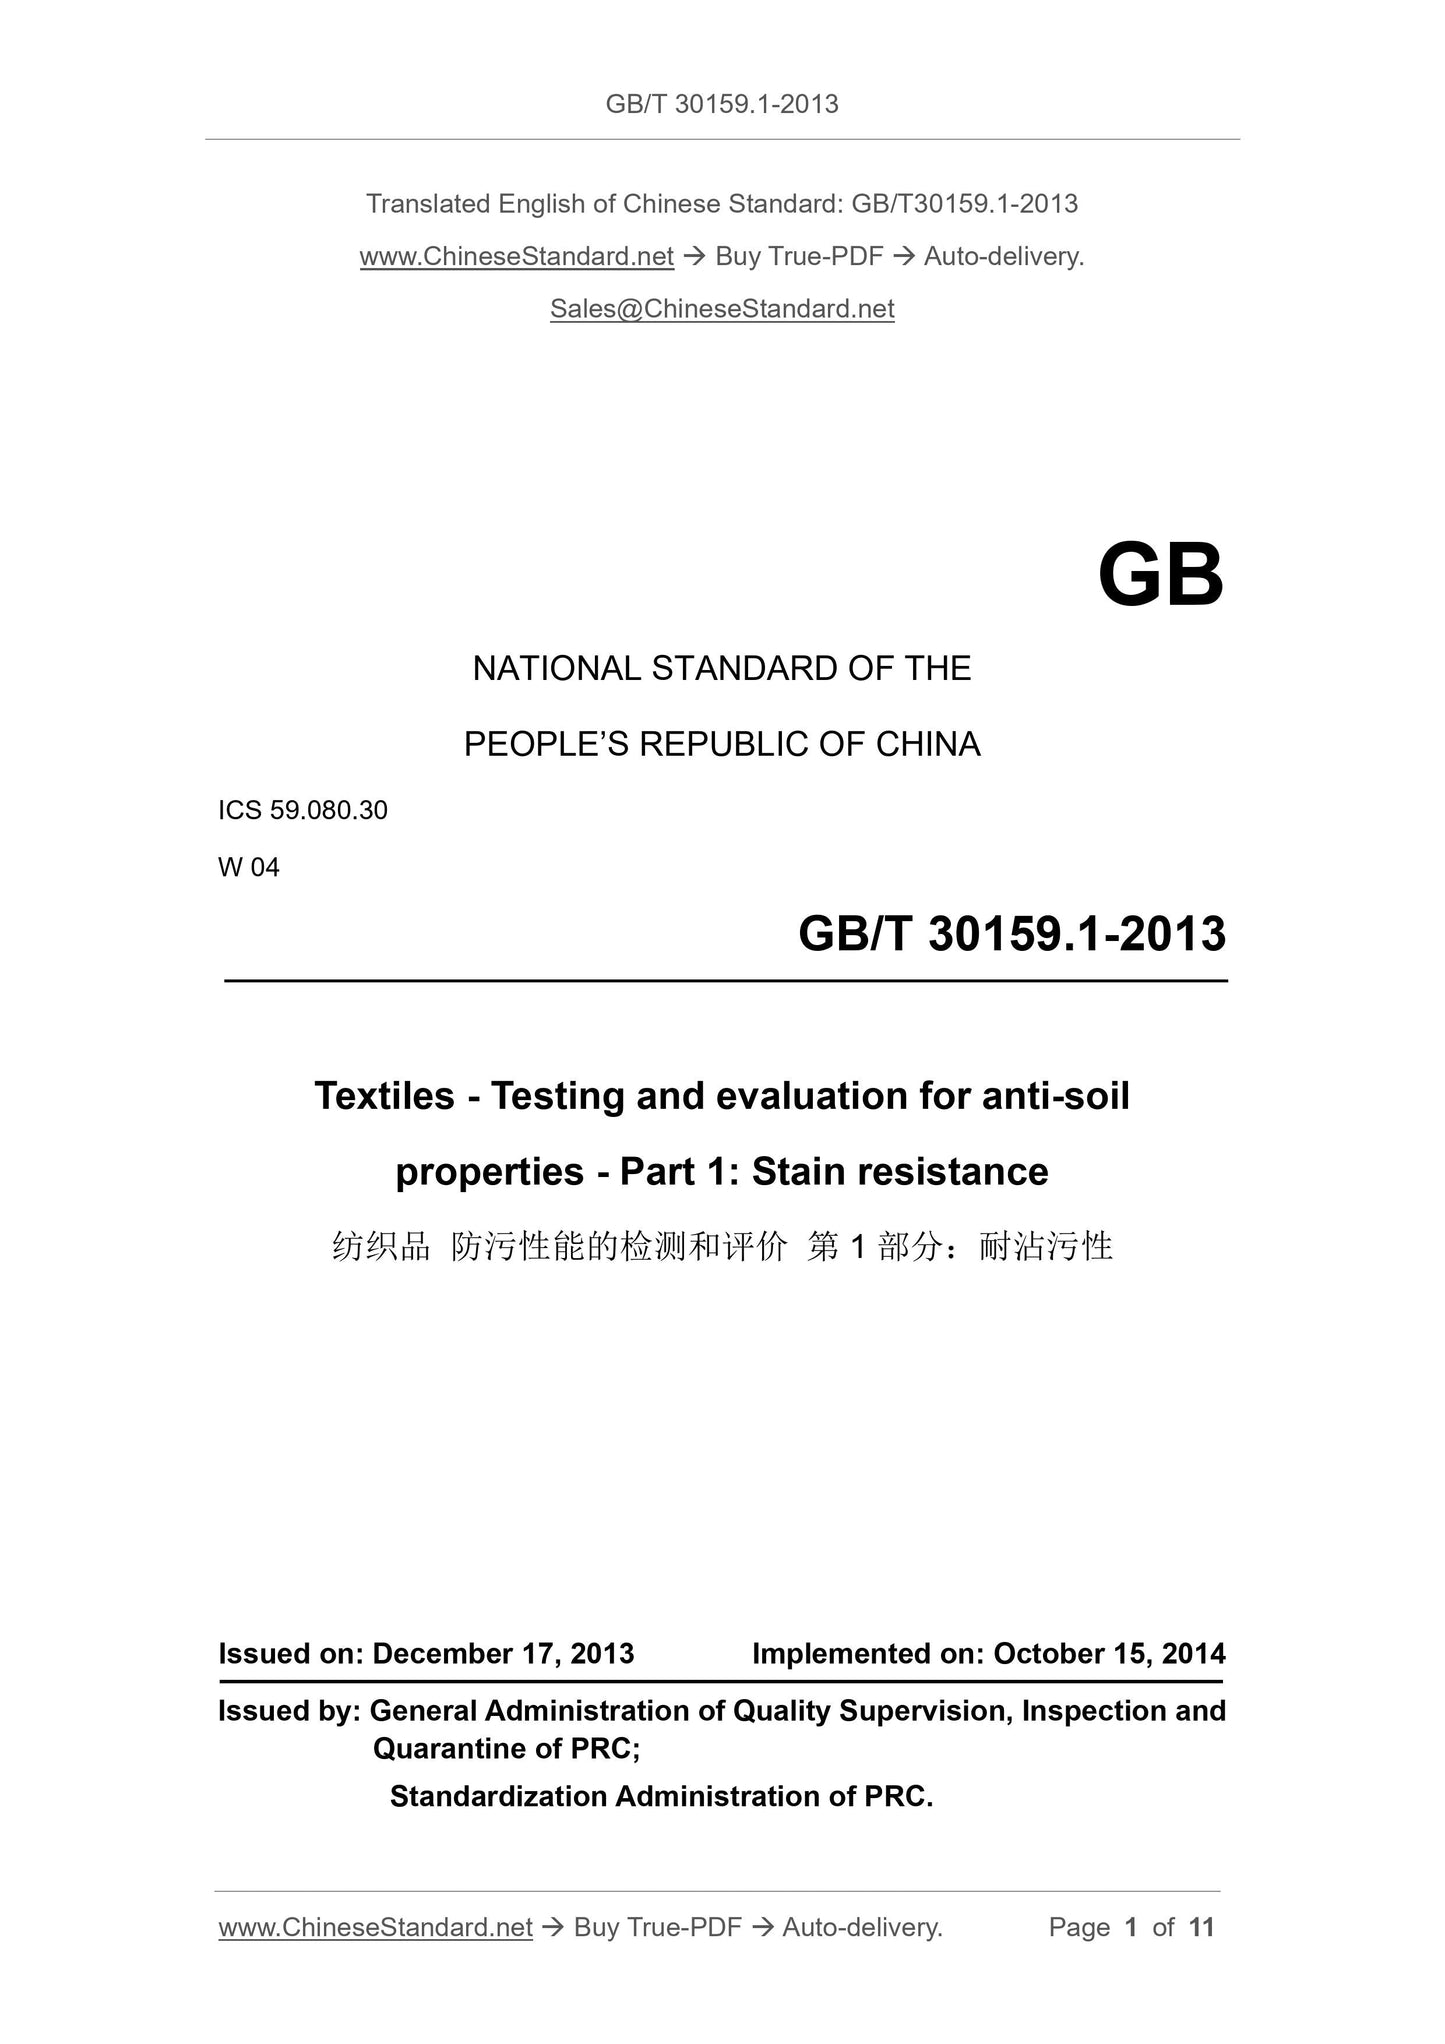 GB/T 30159.1-2013 Page 1